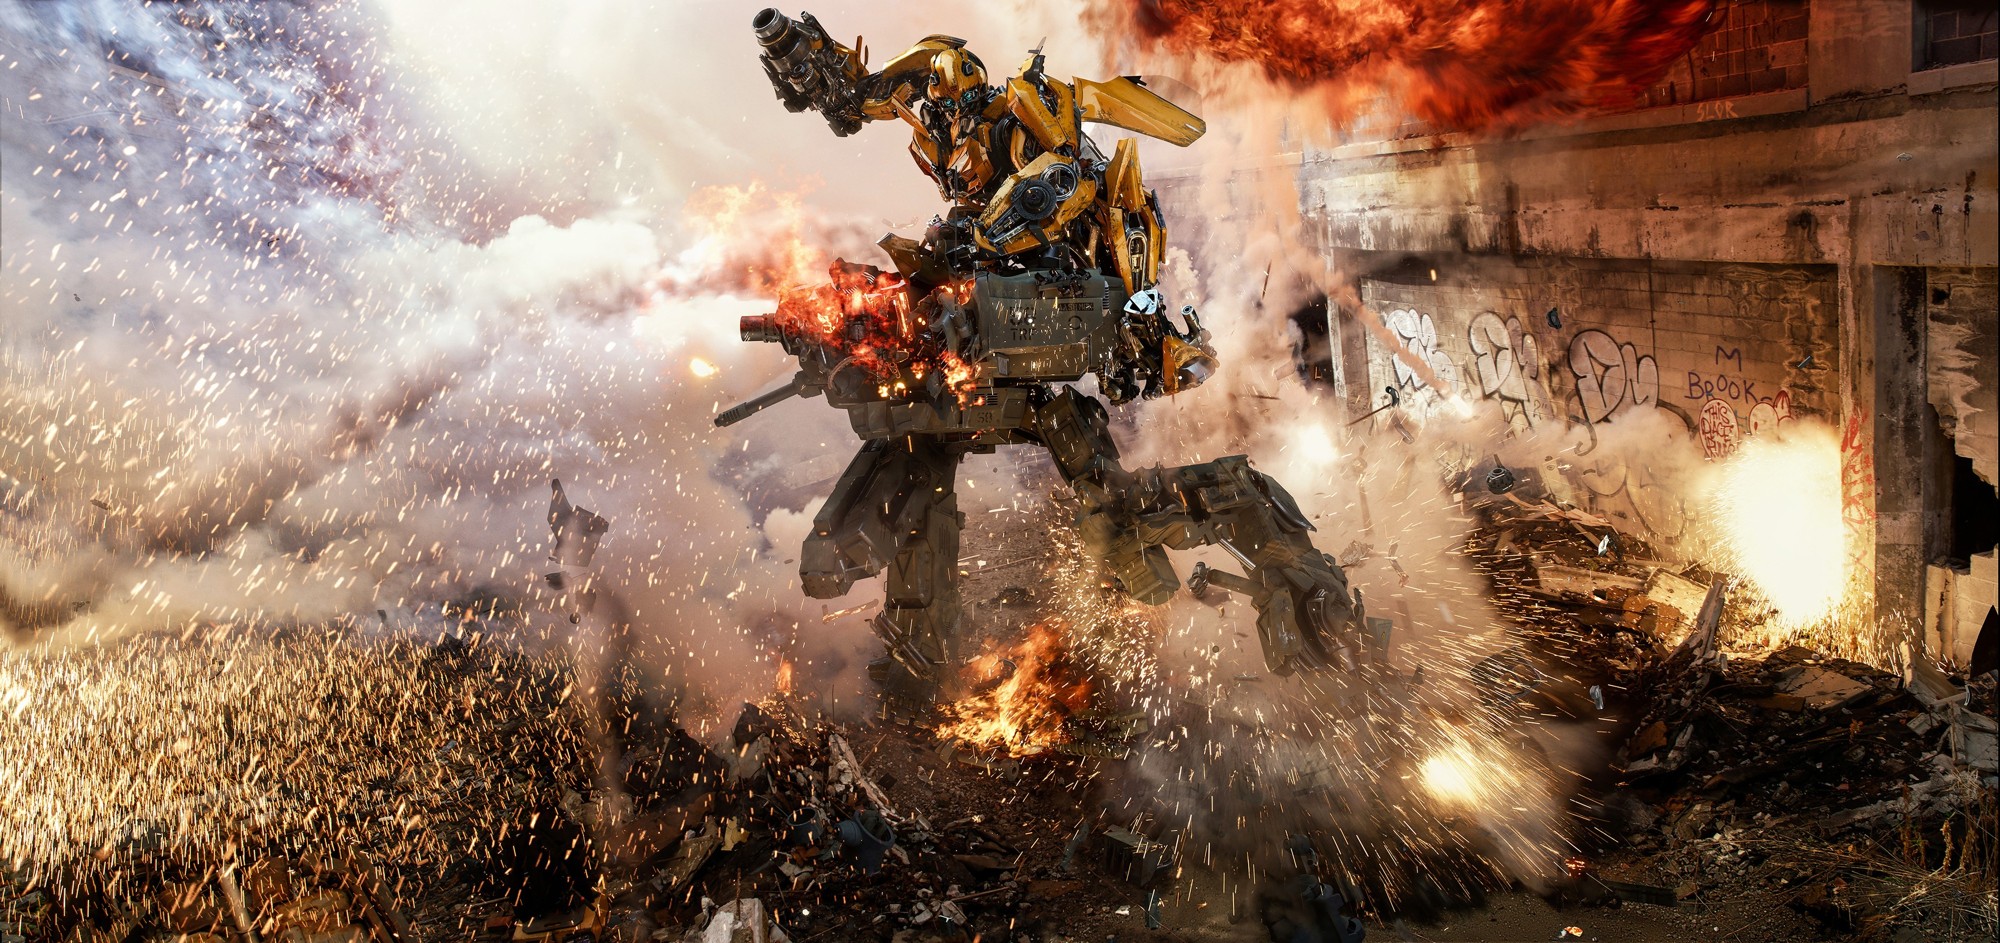 Bumblebee from Paramount Pictures' Transformers: The Last Knight (2017)